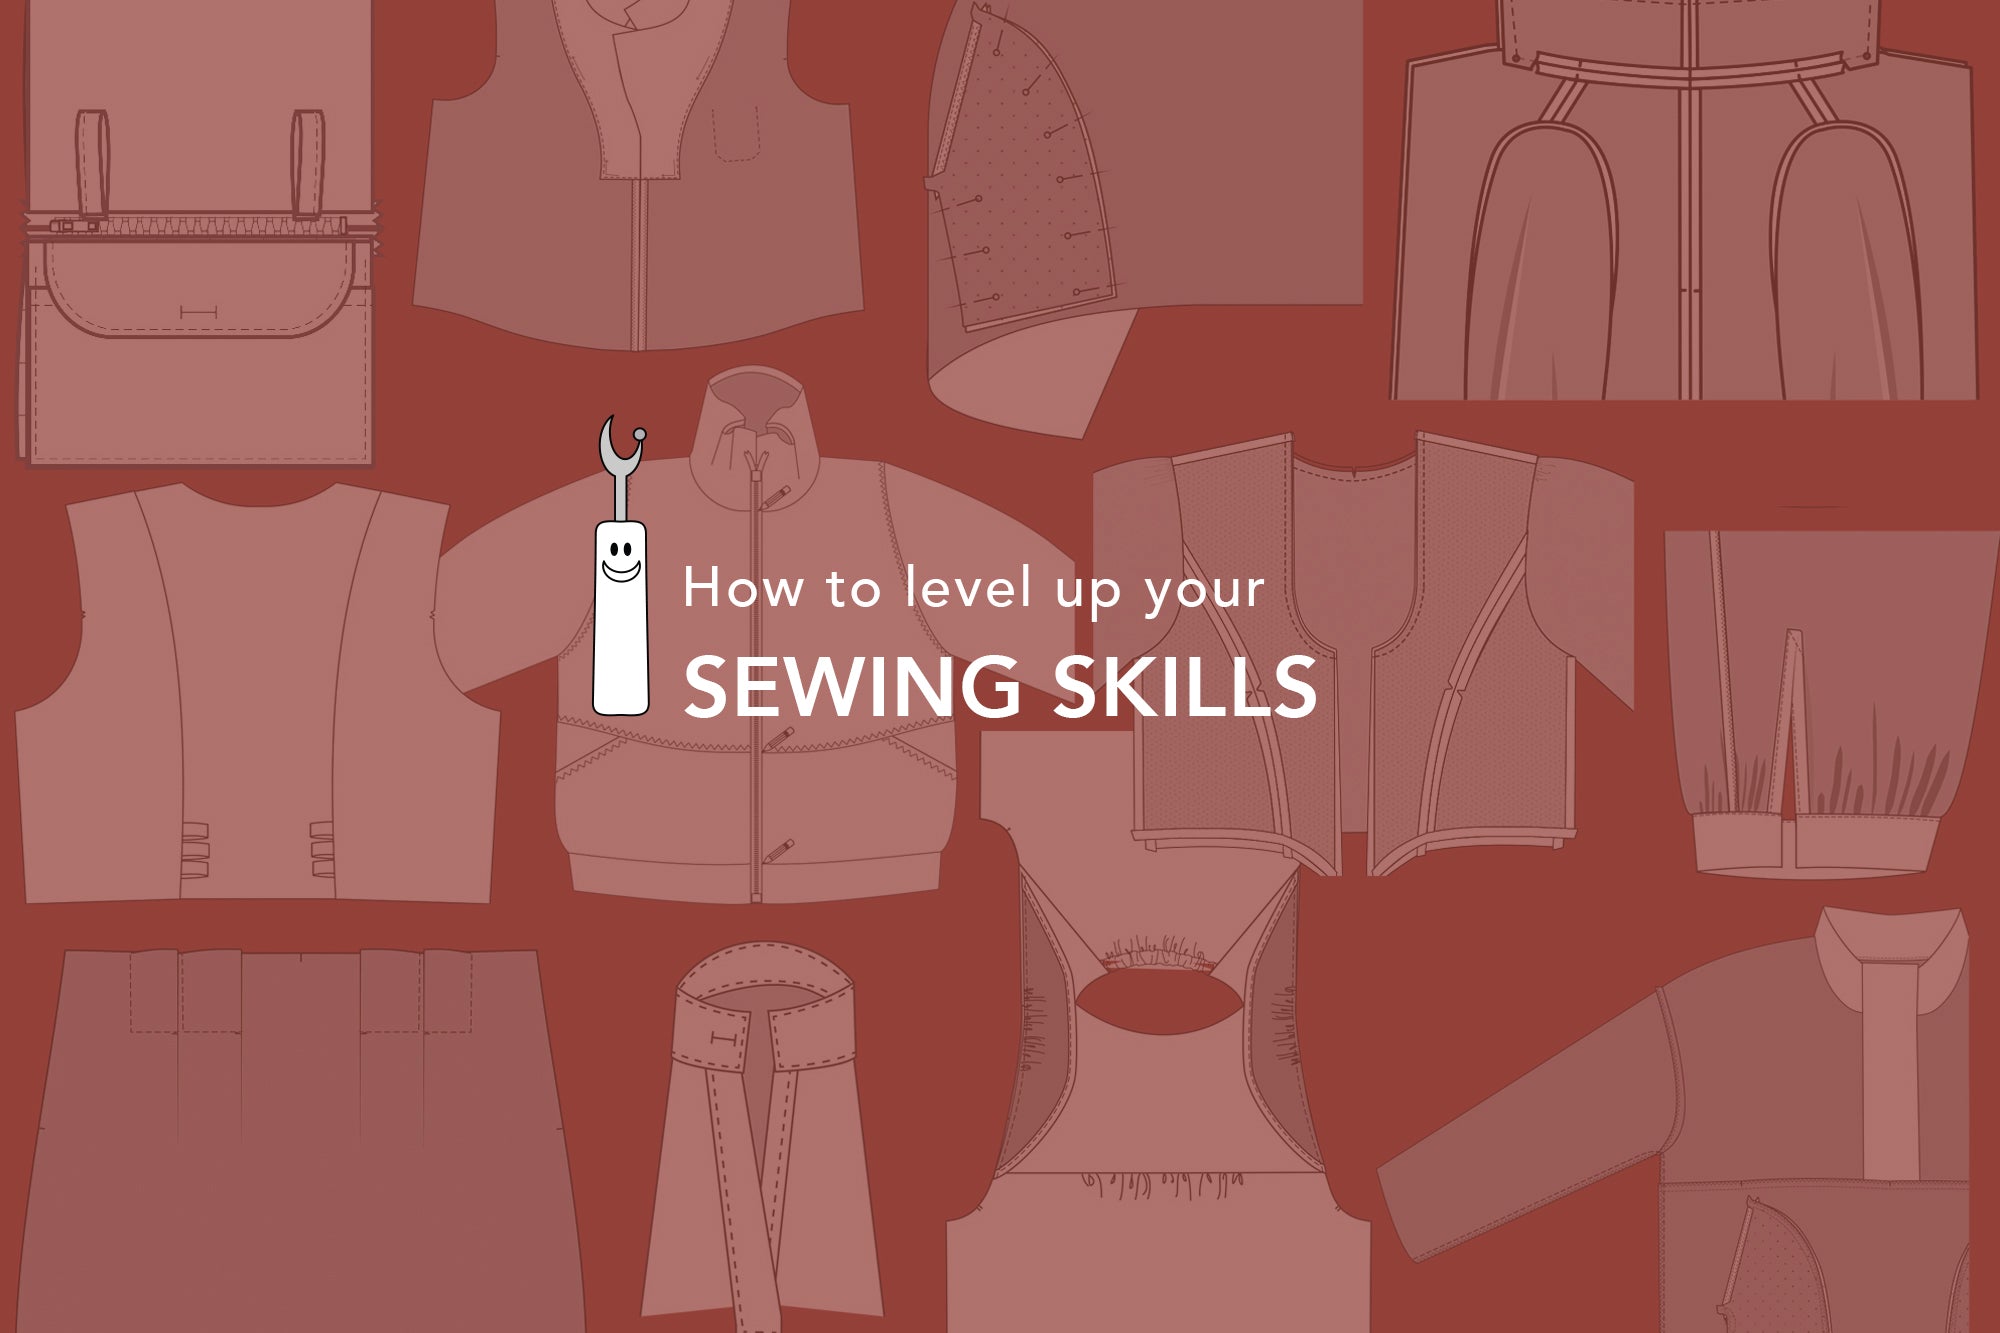 How to level up your sewing skills with techniques and pattern suggestions